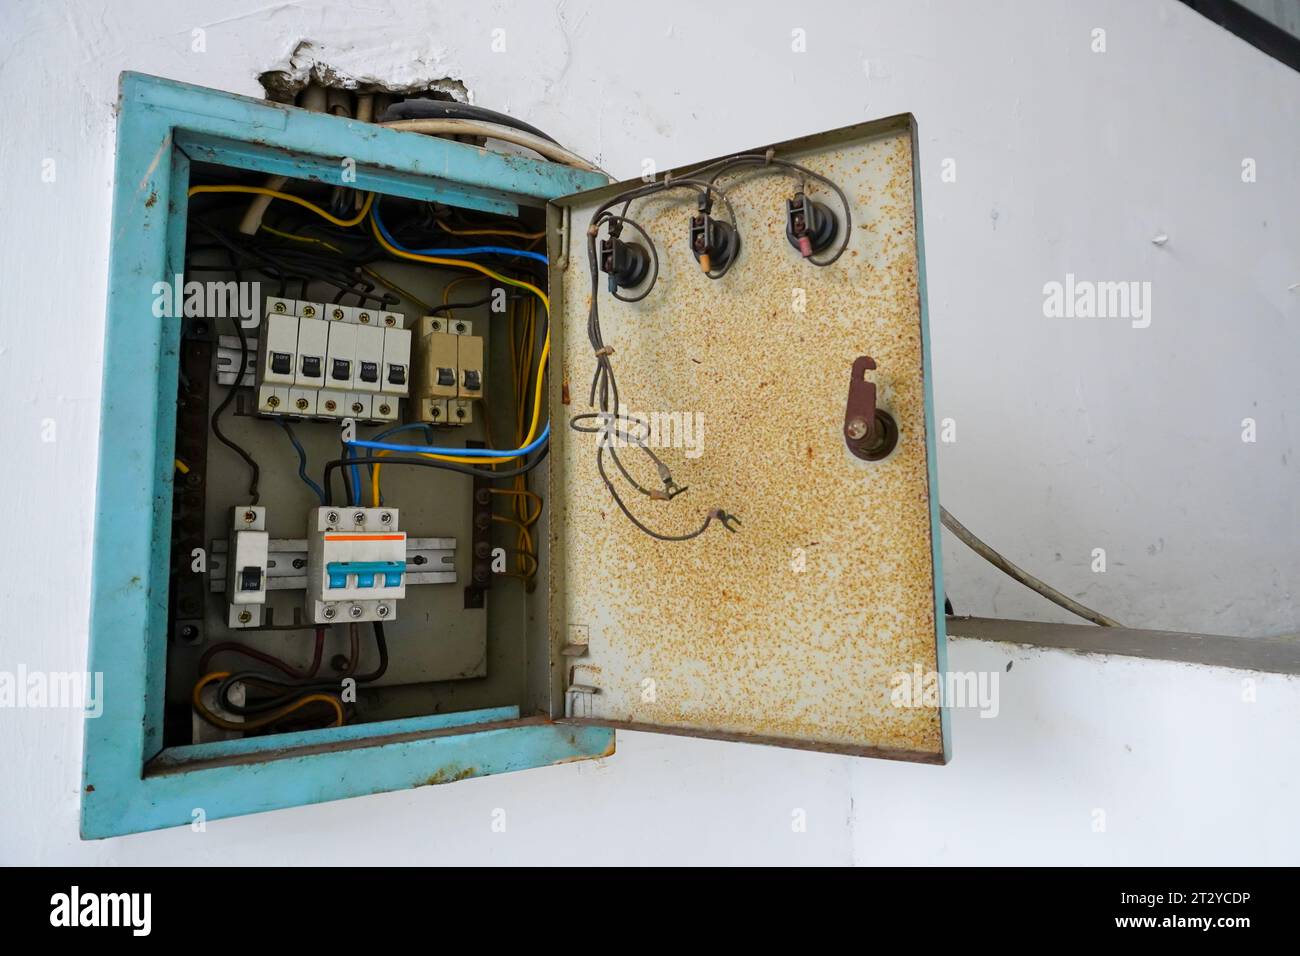 Power distribution board. Electrical panel with a row of fuses for different areas in a building, set against a white wall Stock Photo